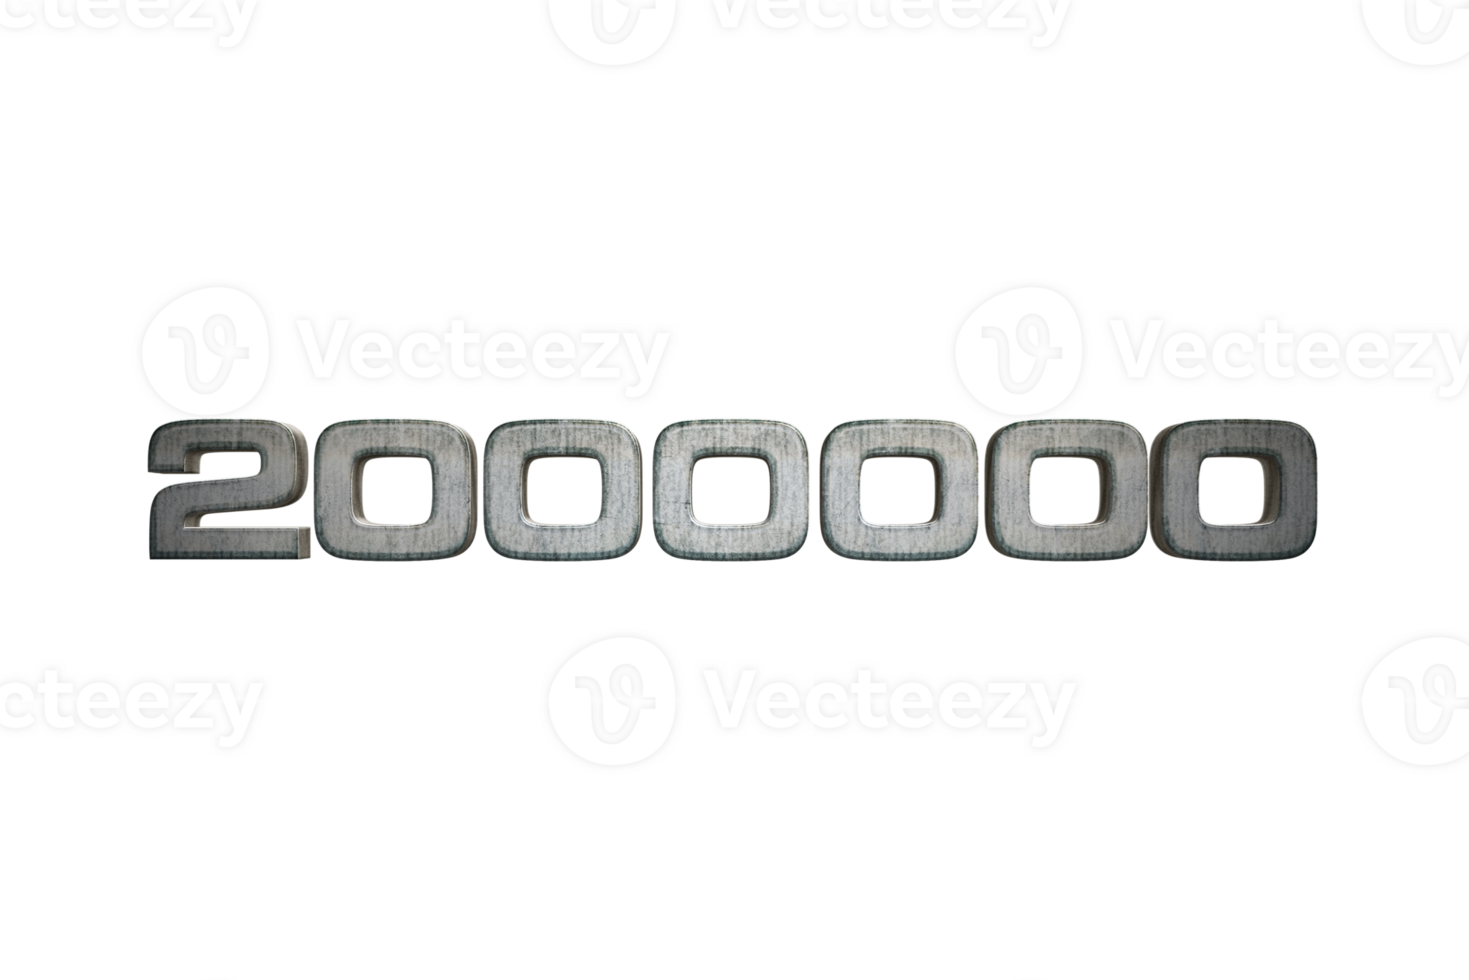 2000000 subscribers celebration greeting Number with star wars design png